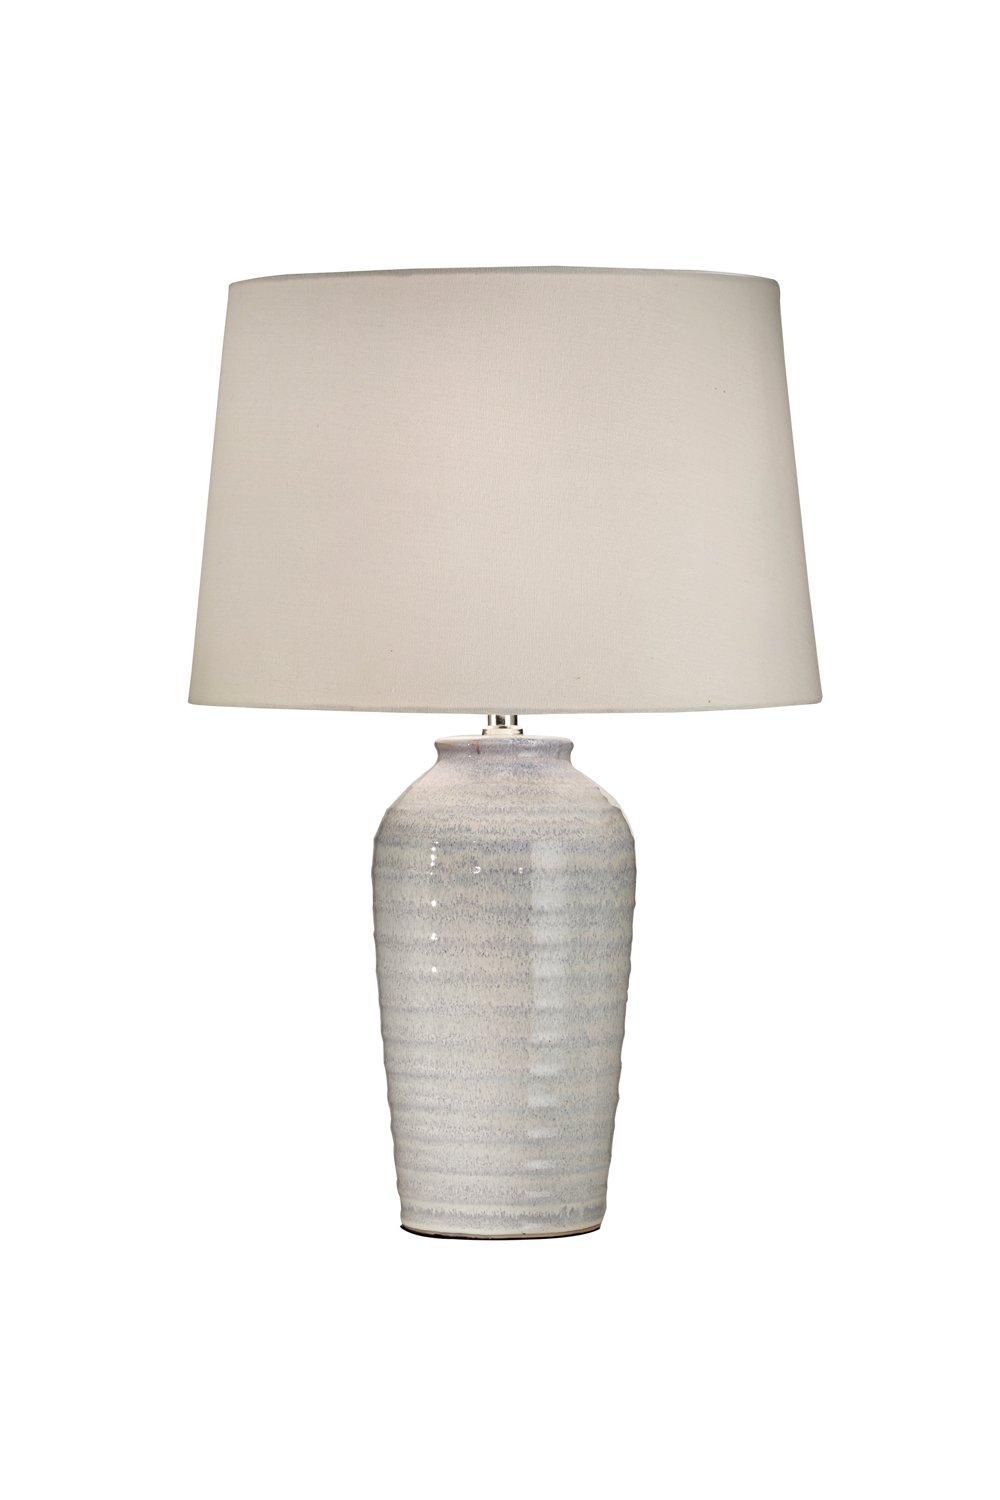 'Tilly' Table Lamp